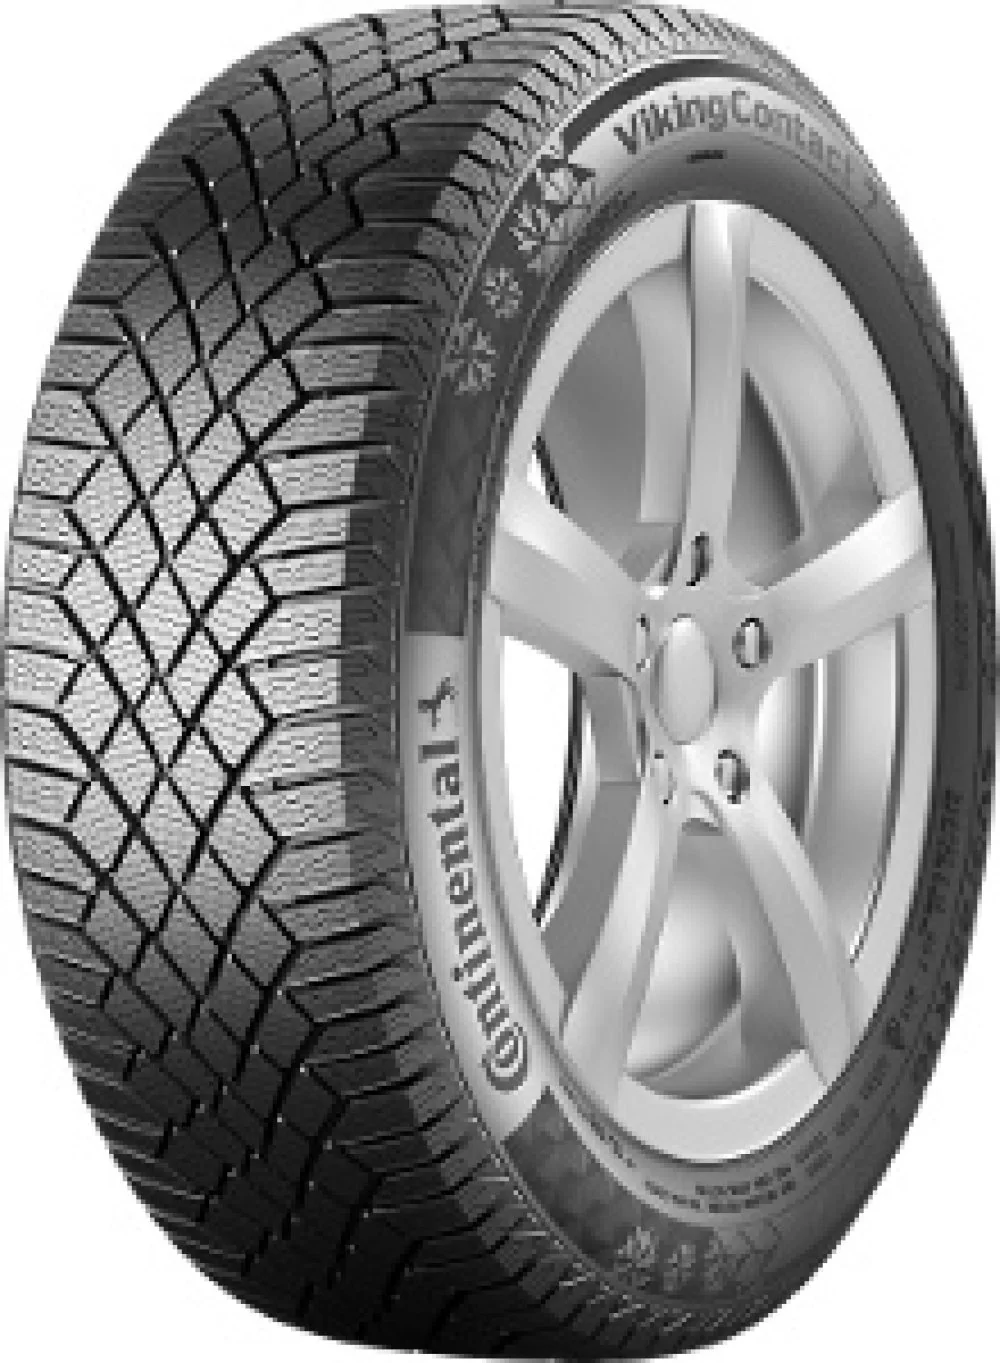 Continental Viking Contact 7 255/55R18 109T